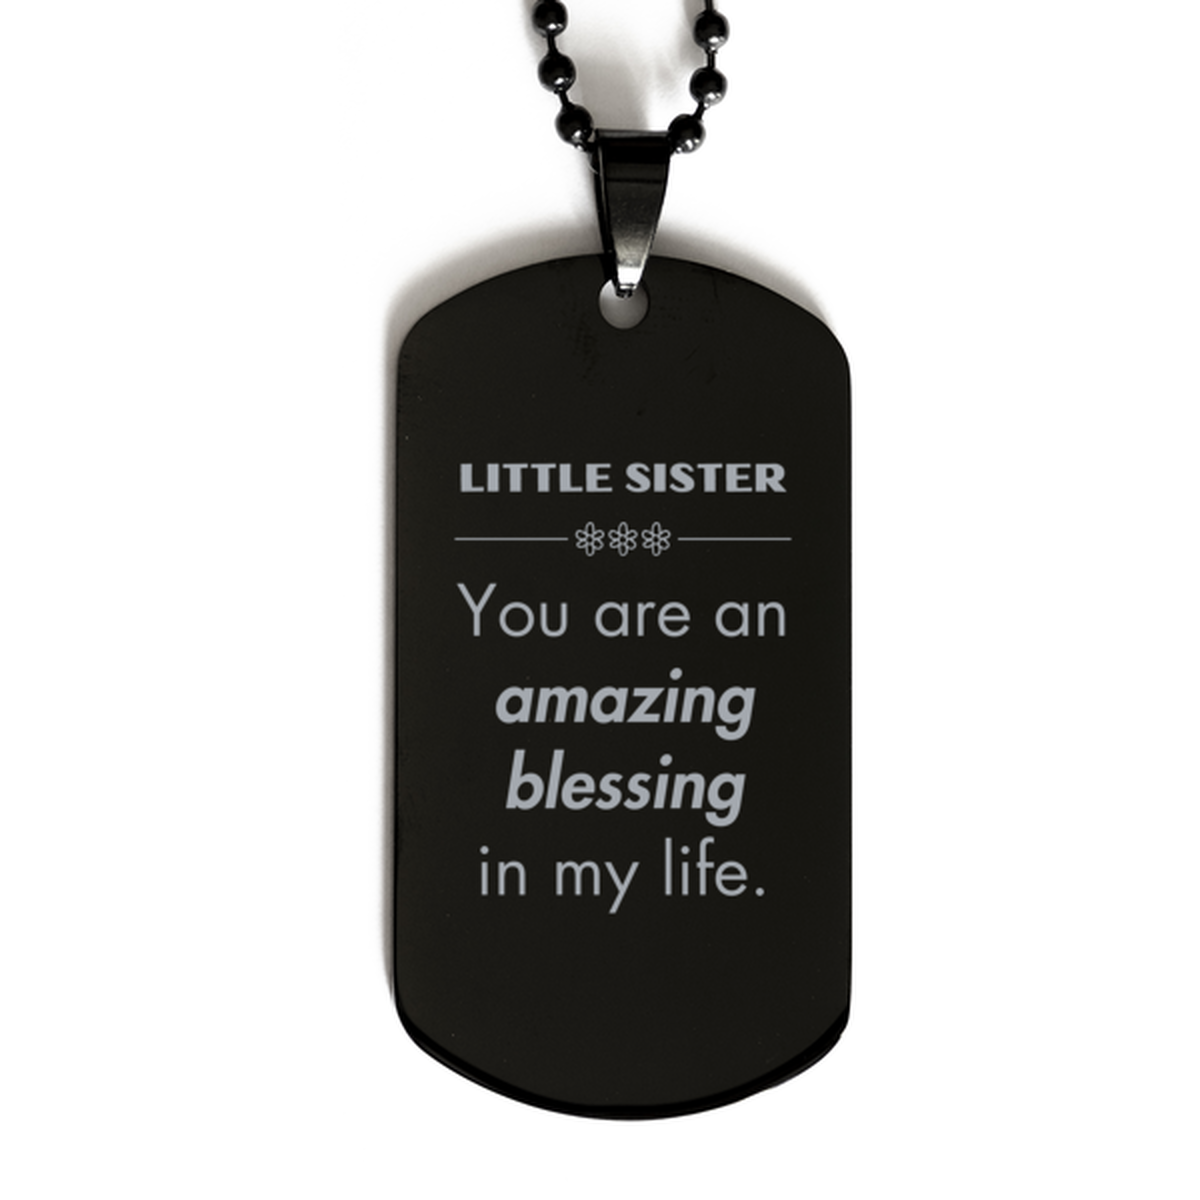 Little Sister Black Dog Tag, You are an amazing blessing in my life, Thank You Gifts For Little Sister, Inspirational Birthday Christmas Unique Gifts For Little Sister